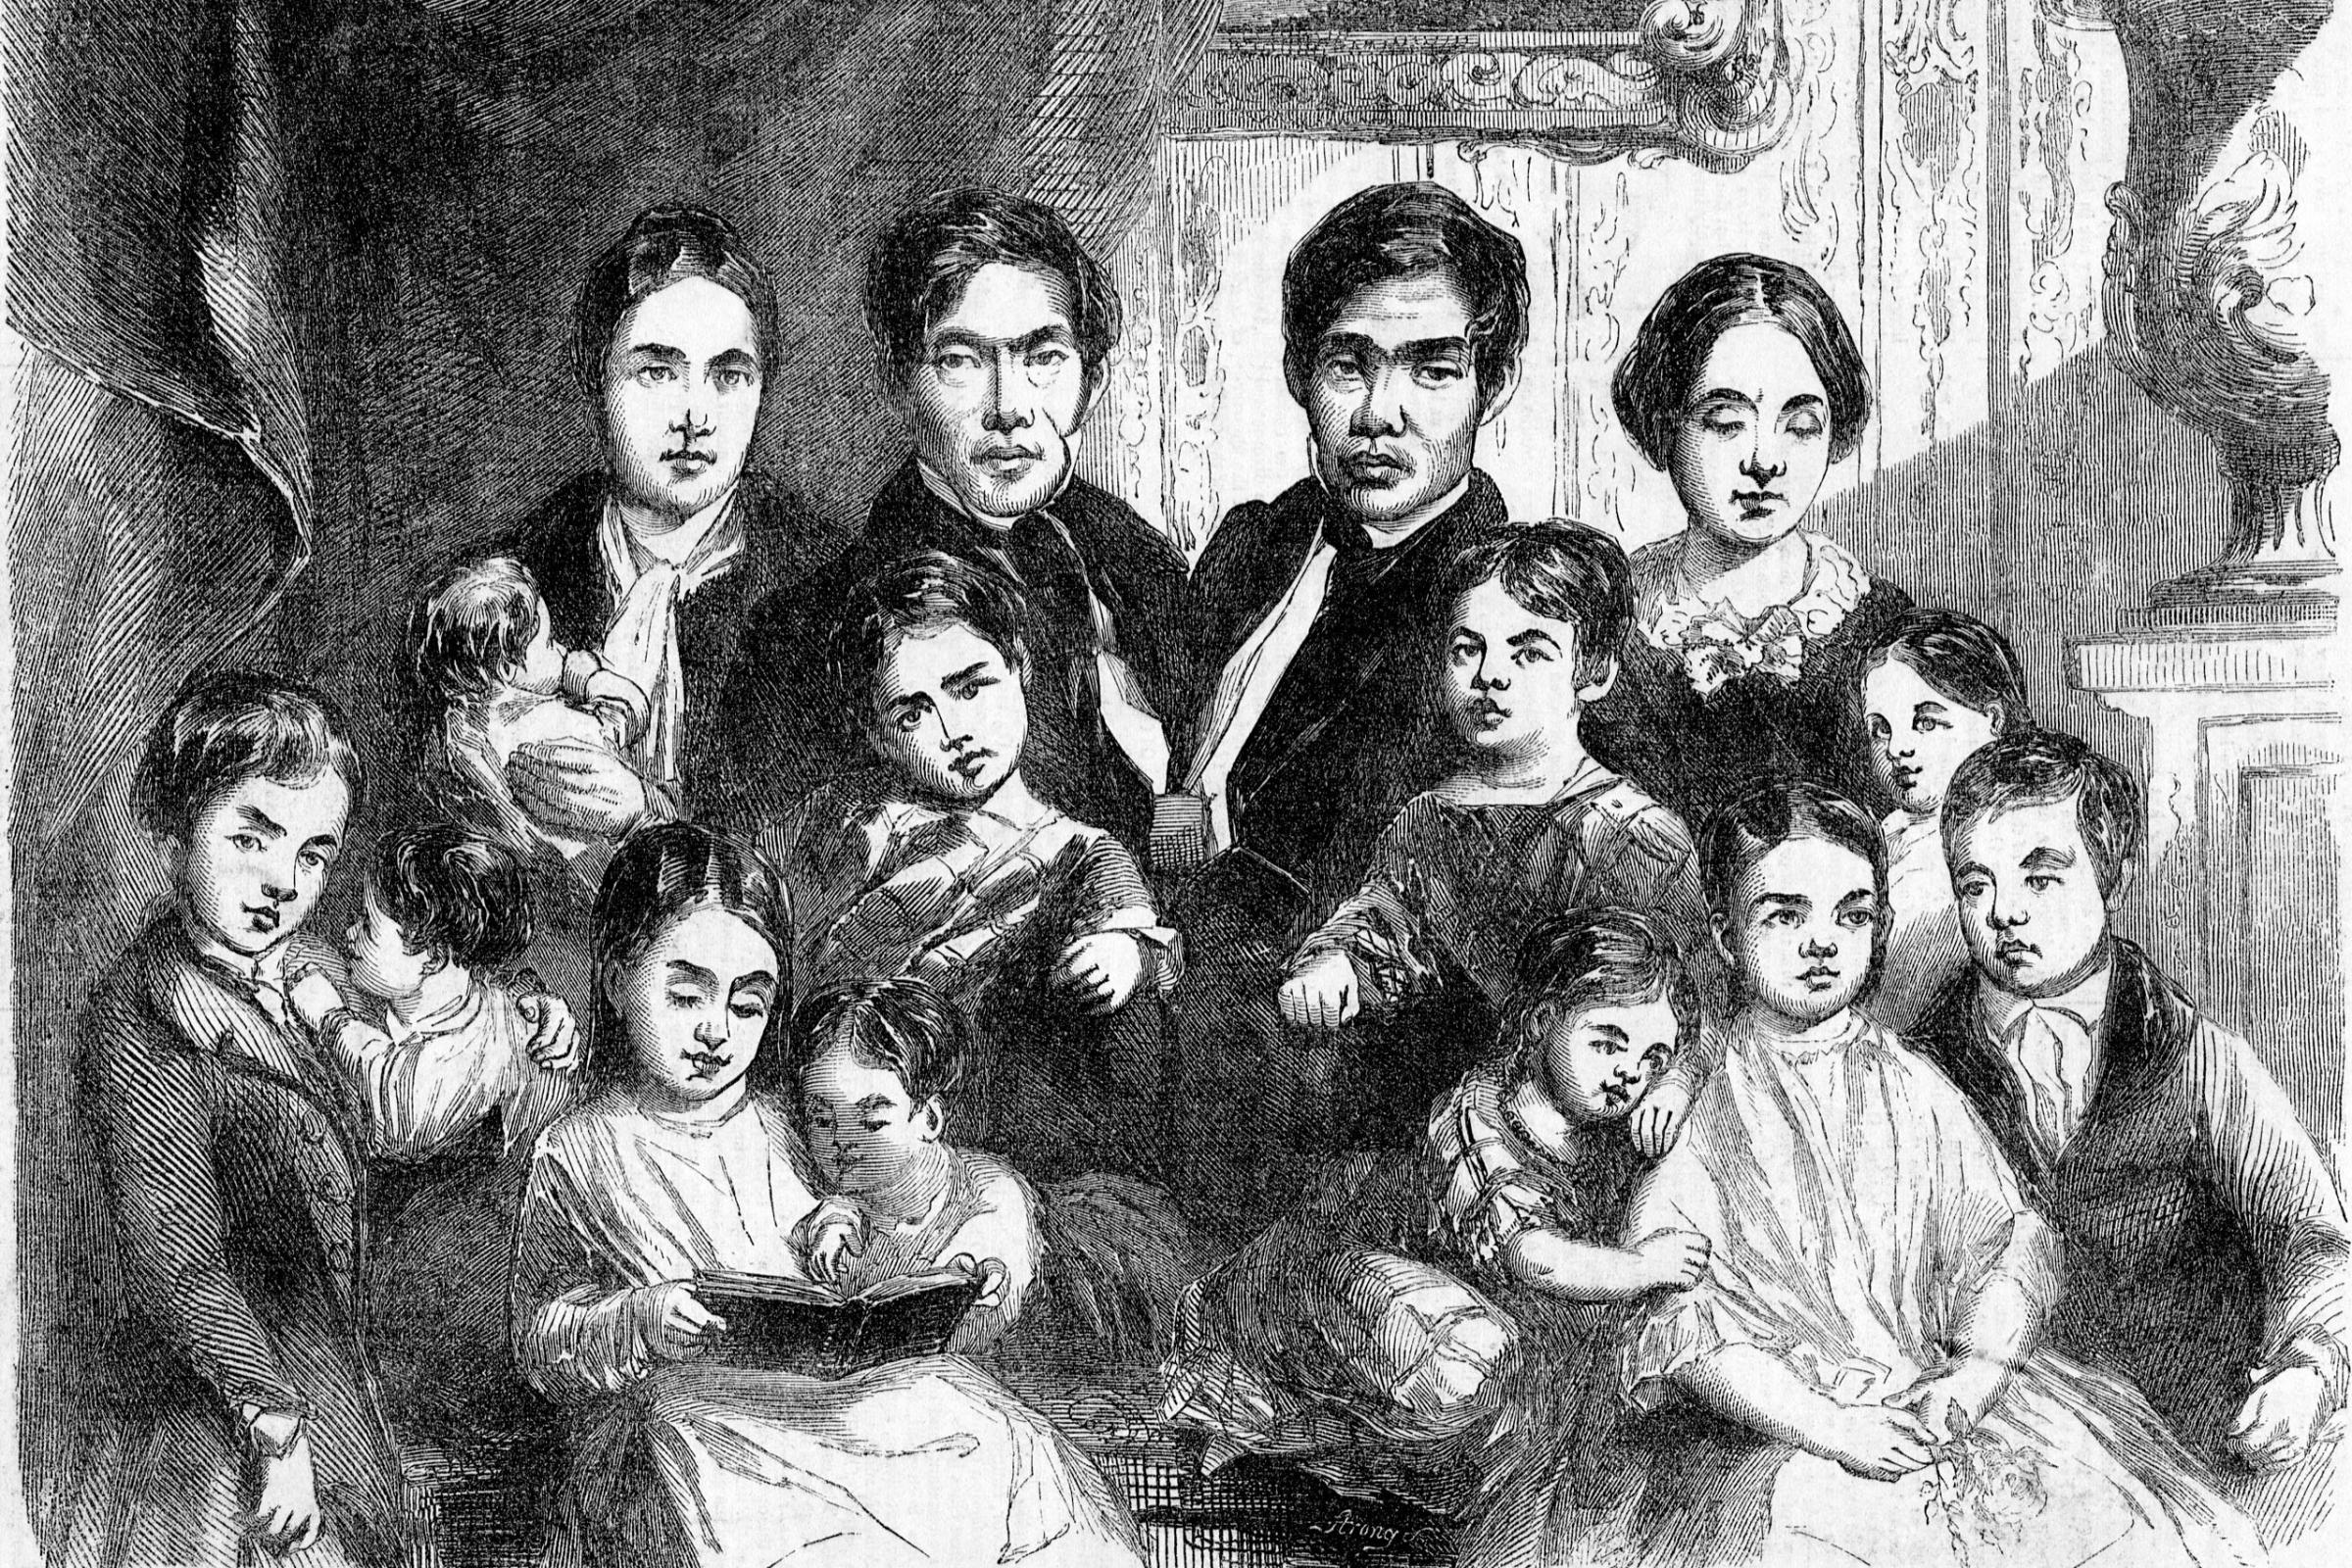 Chang and Eng With Their Families